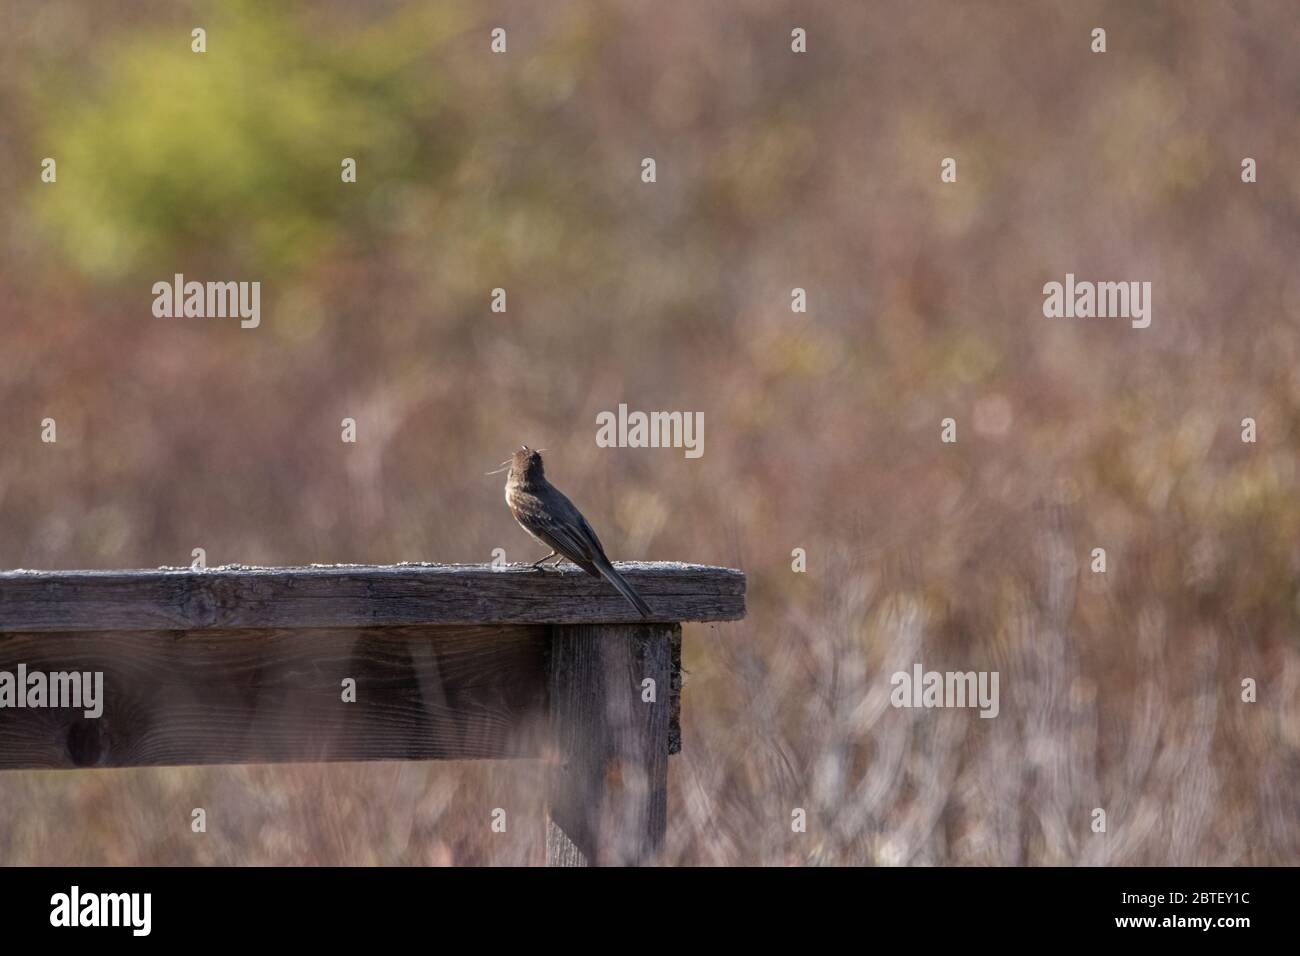 A small bird on a wooden railing at a bog in springtime. Stock Photo